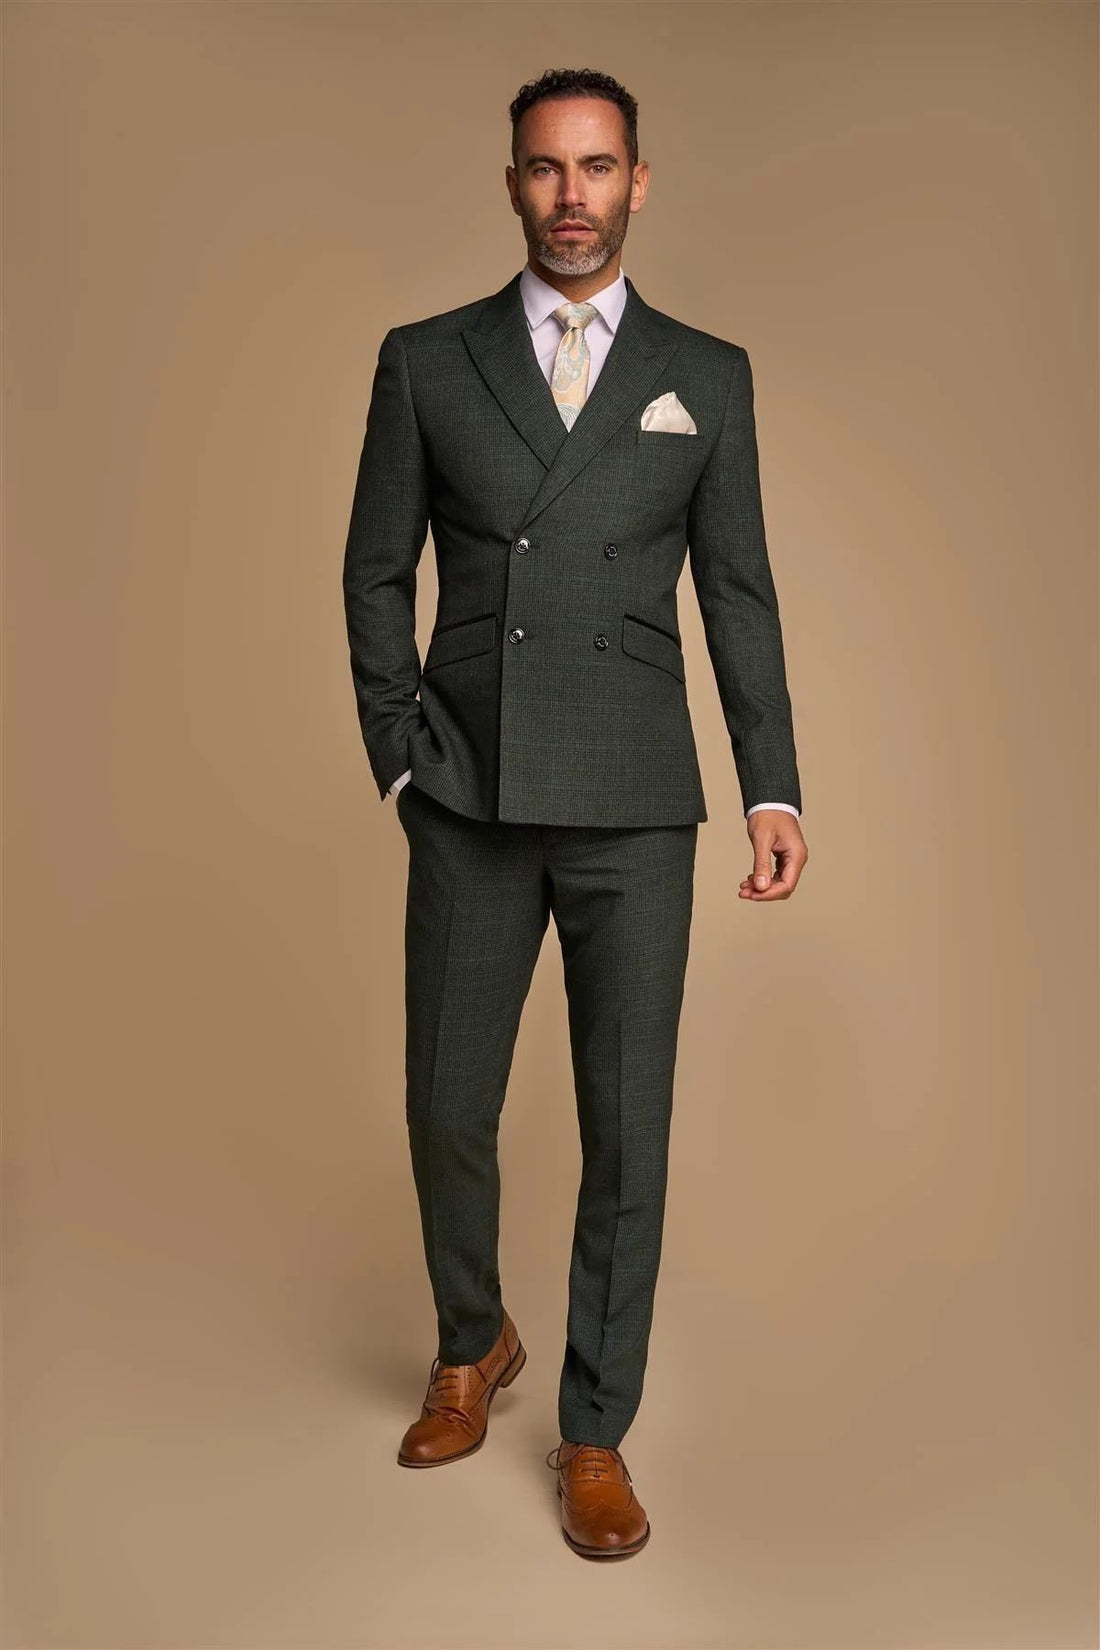 Men's Suit 2 Piece Olive Green Double Breasted Tailored Fit